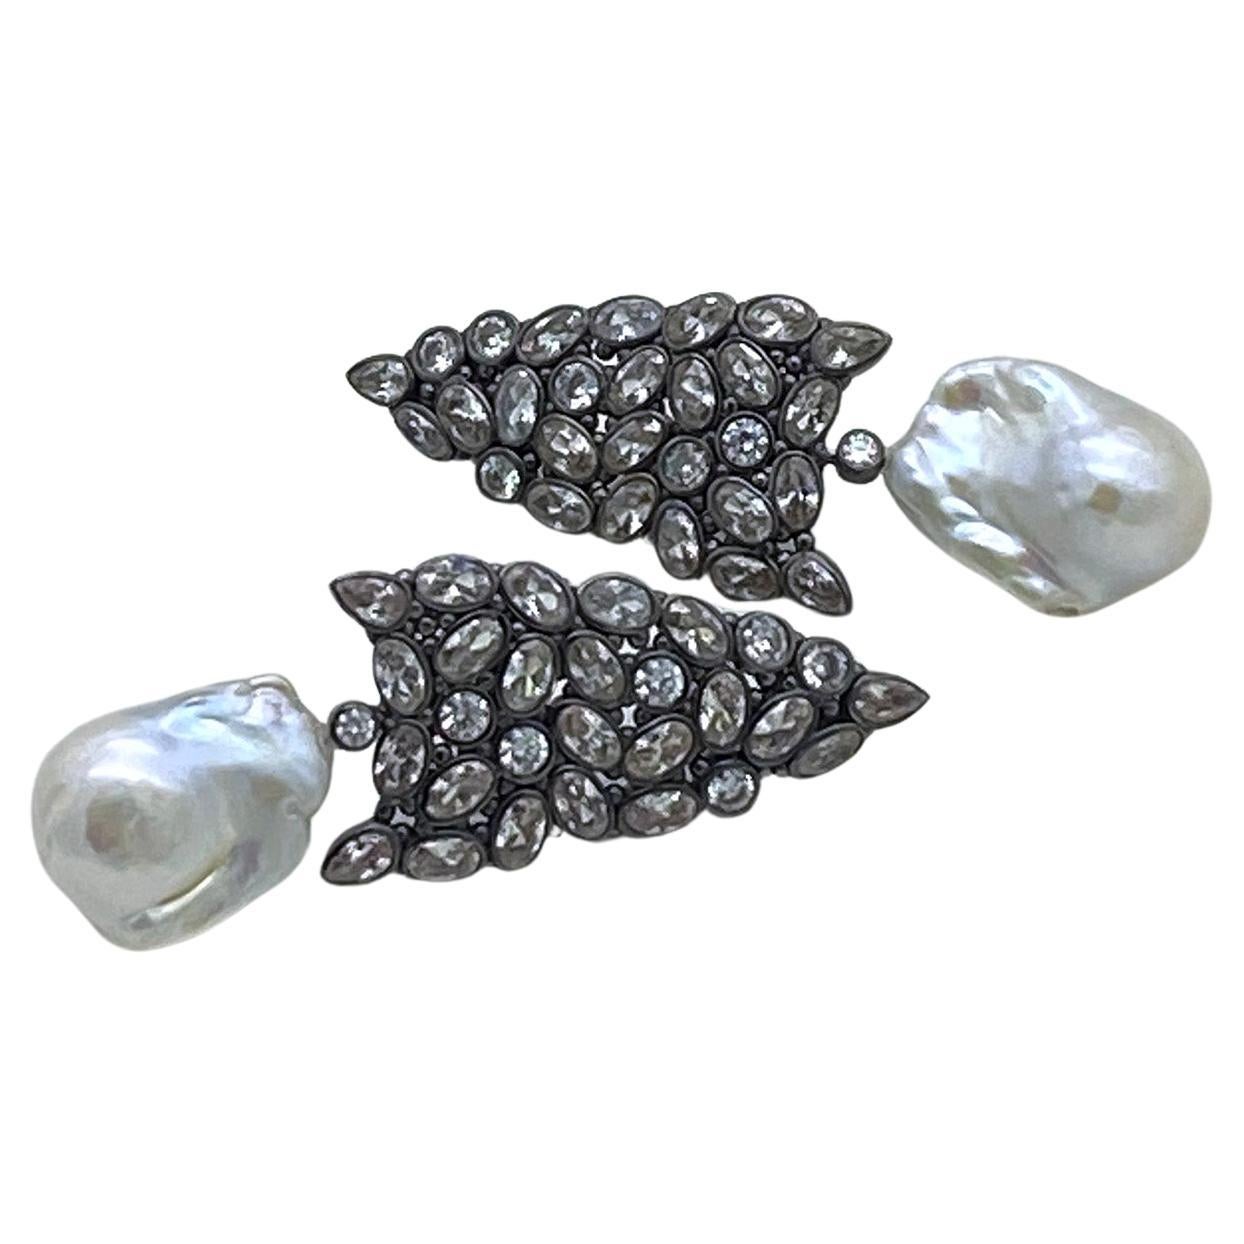 This is a pair of baroque pearl with CZ drop earrings. There are mutiple shapes of CZ clusters bezel set in black gold plated stering silver arrowhead shaped earrings plus dangles with a 18 x 22mm baroque pearl each.

Our vintage jewelry collection